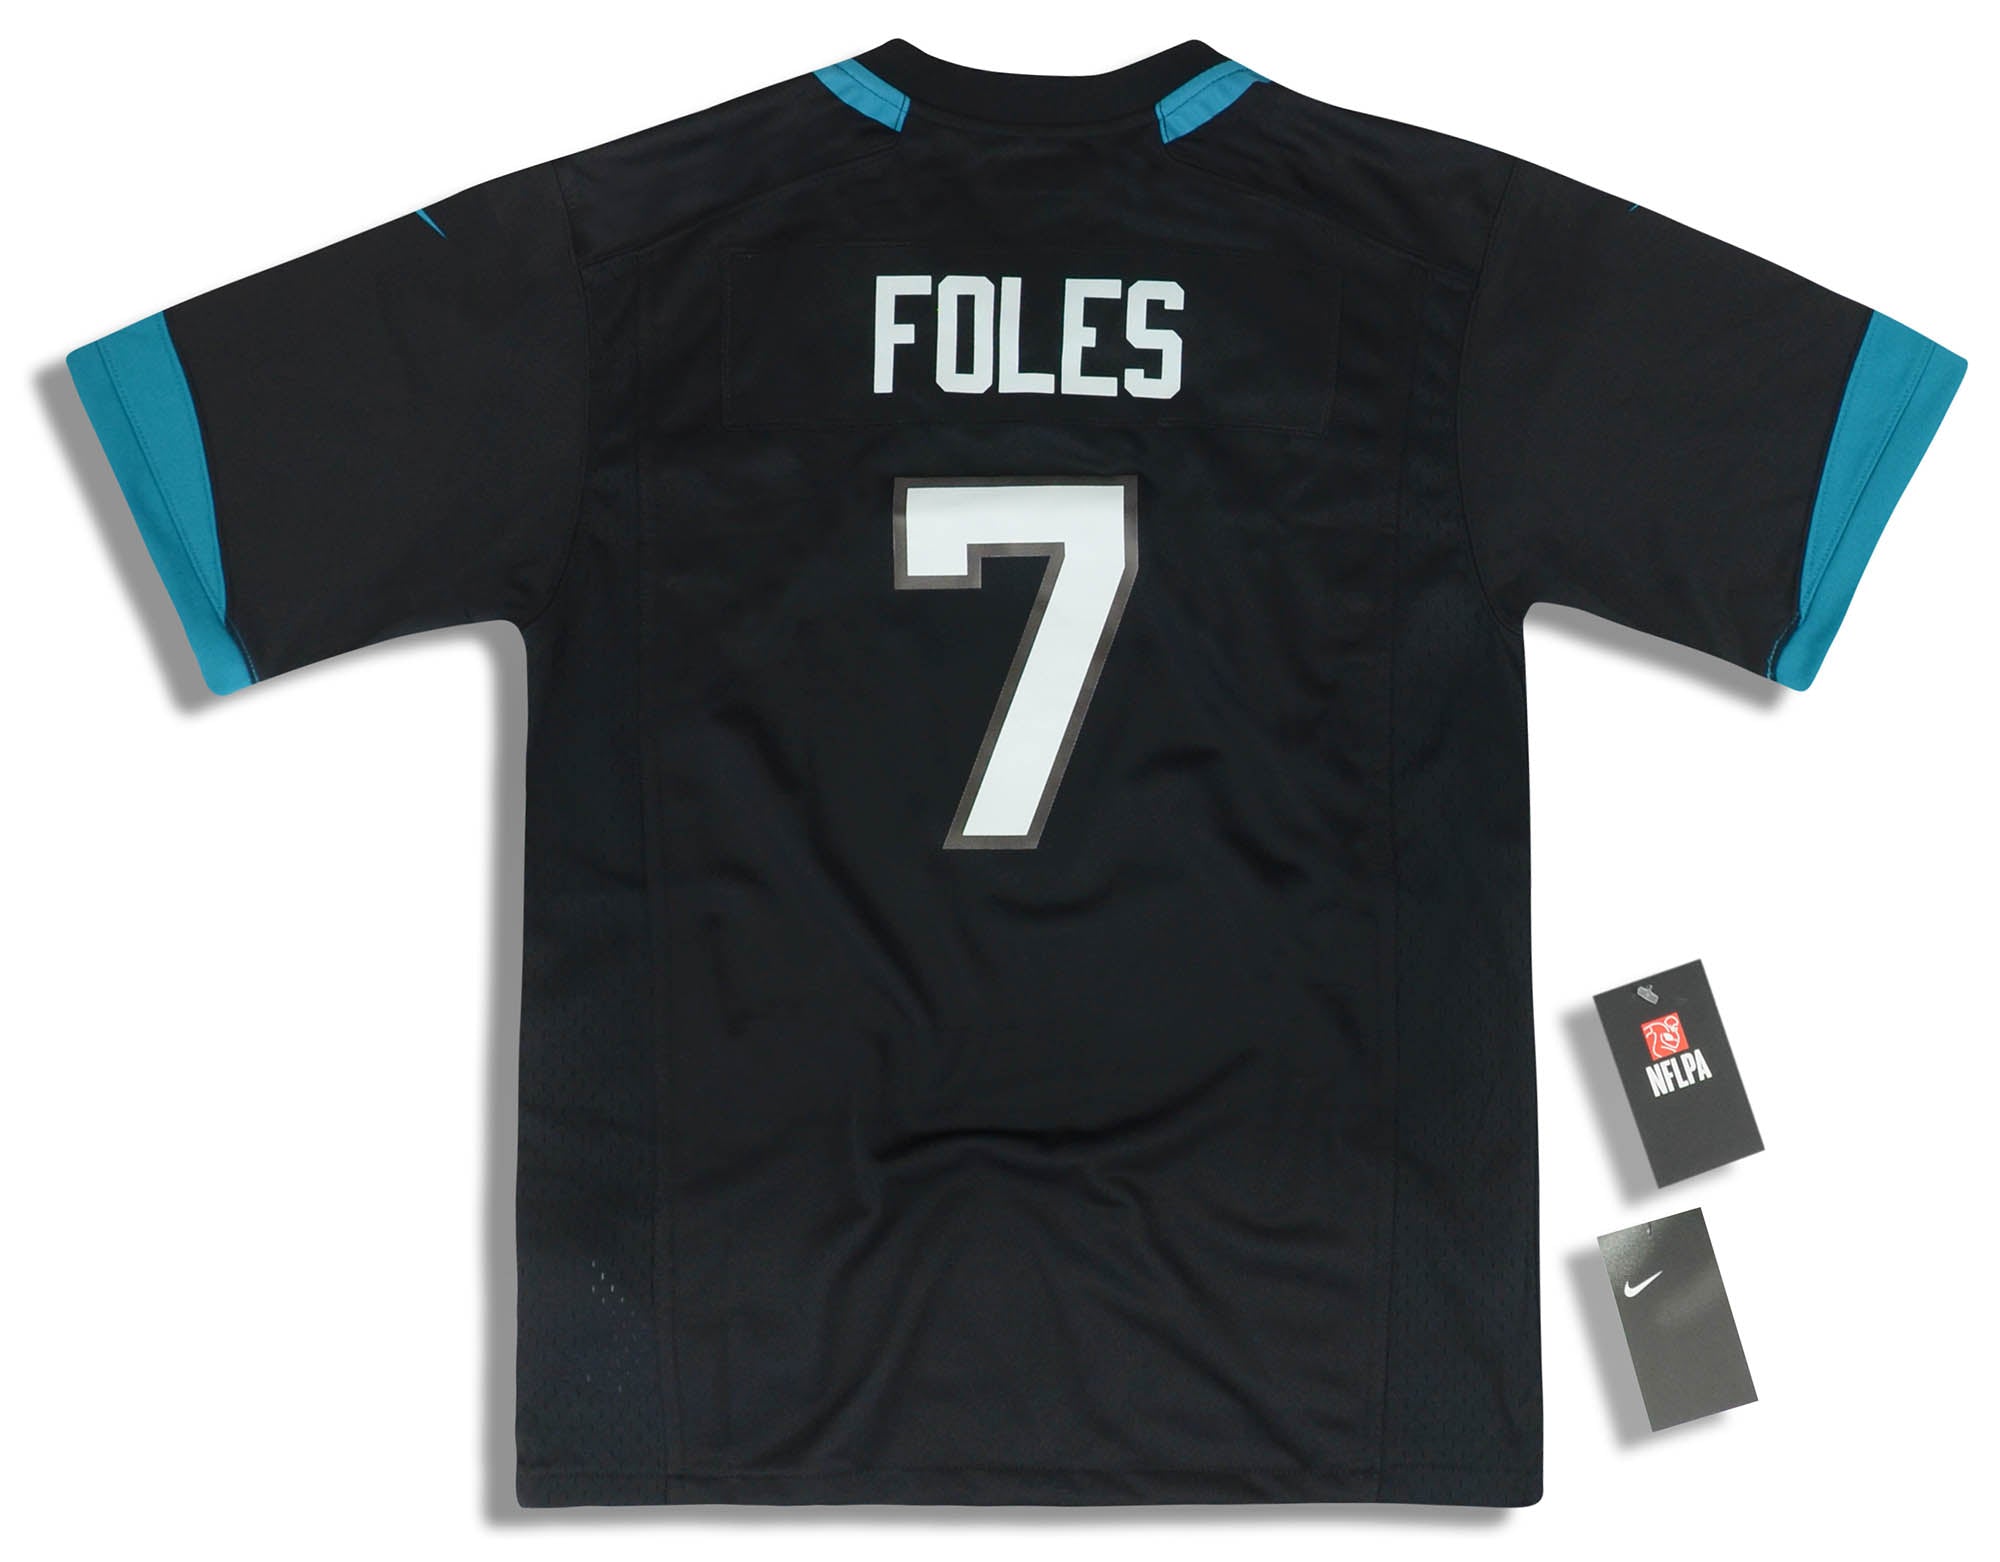 2019 JACKSONVILLE JAGUARS FOLES #7 NIKE GAME JERSEY (HOME) Y - W/TAGS